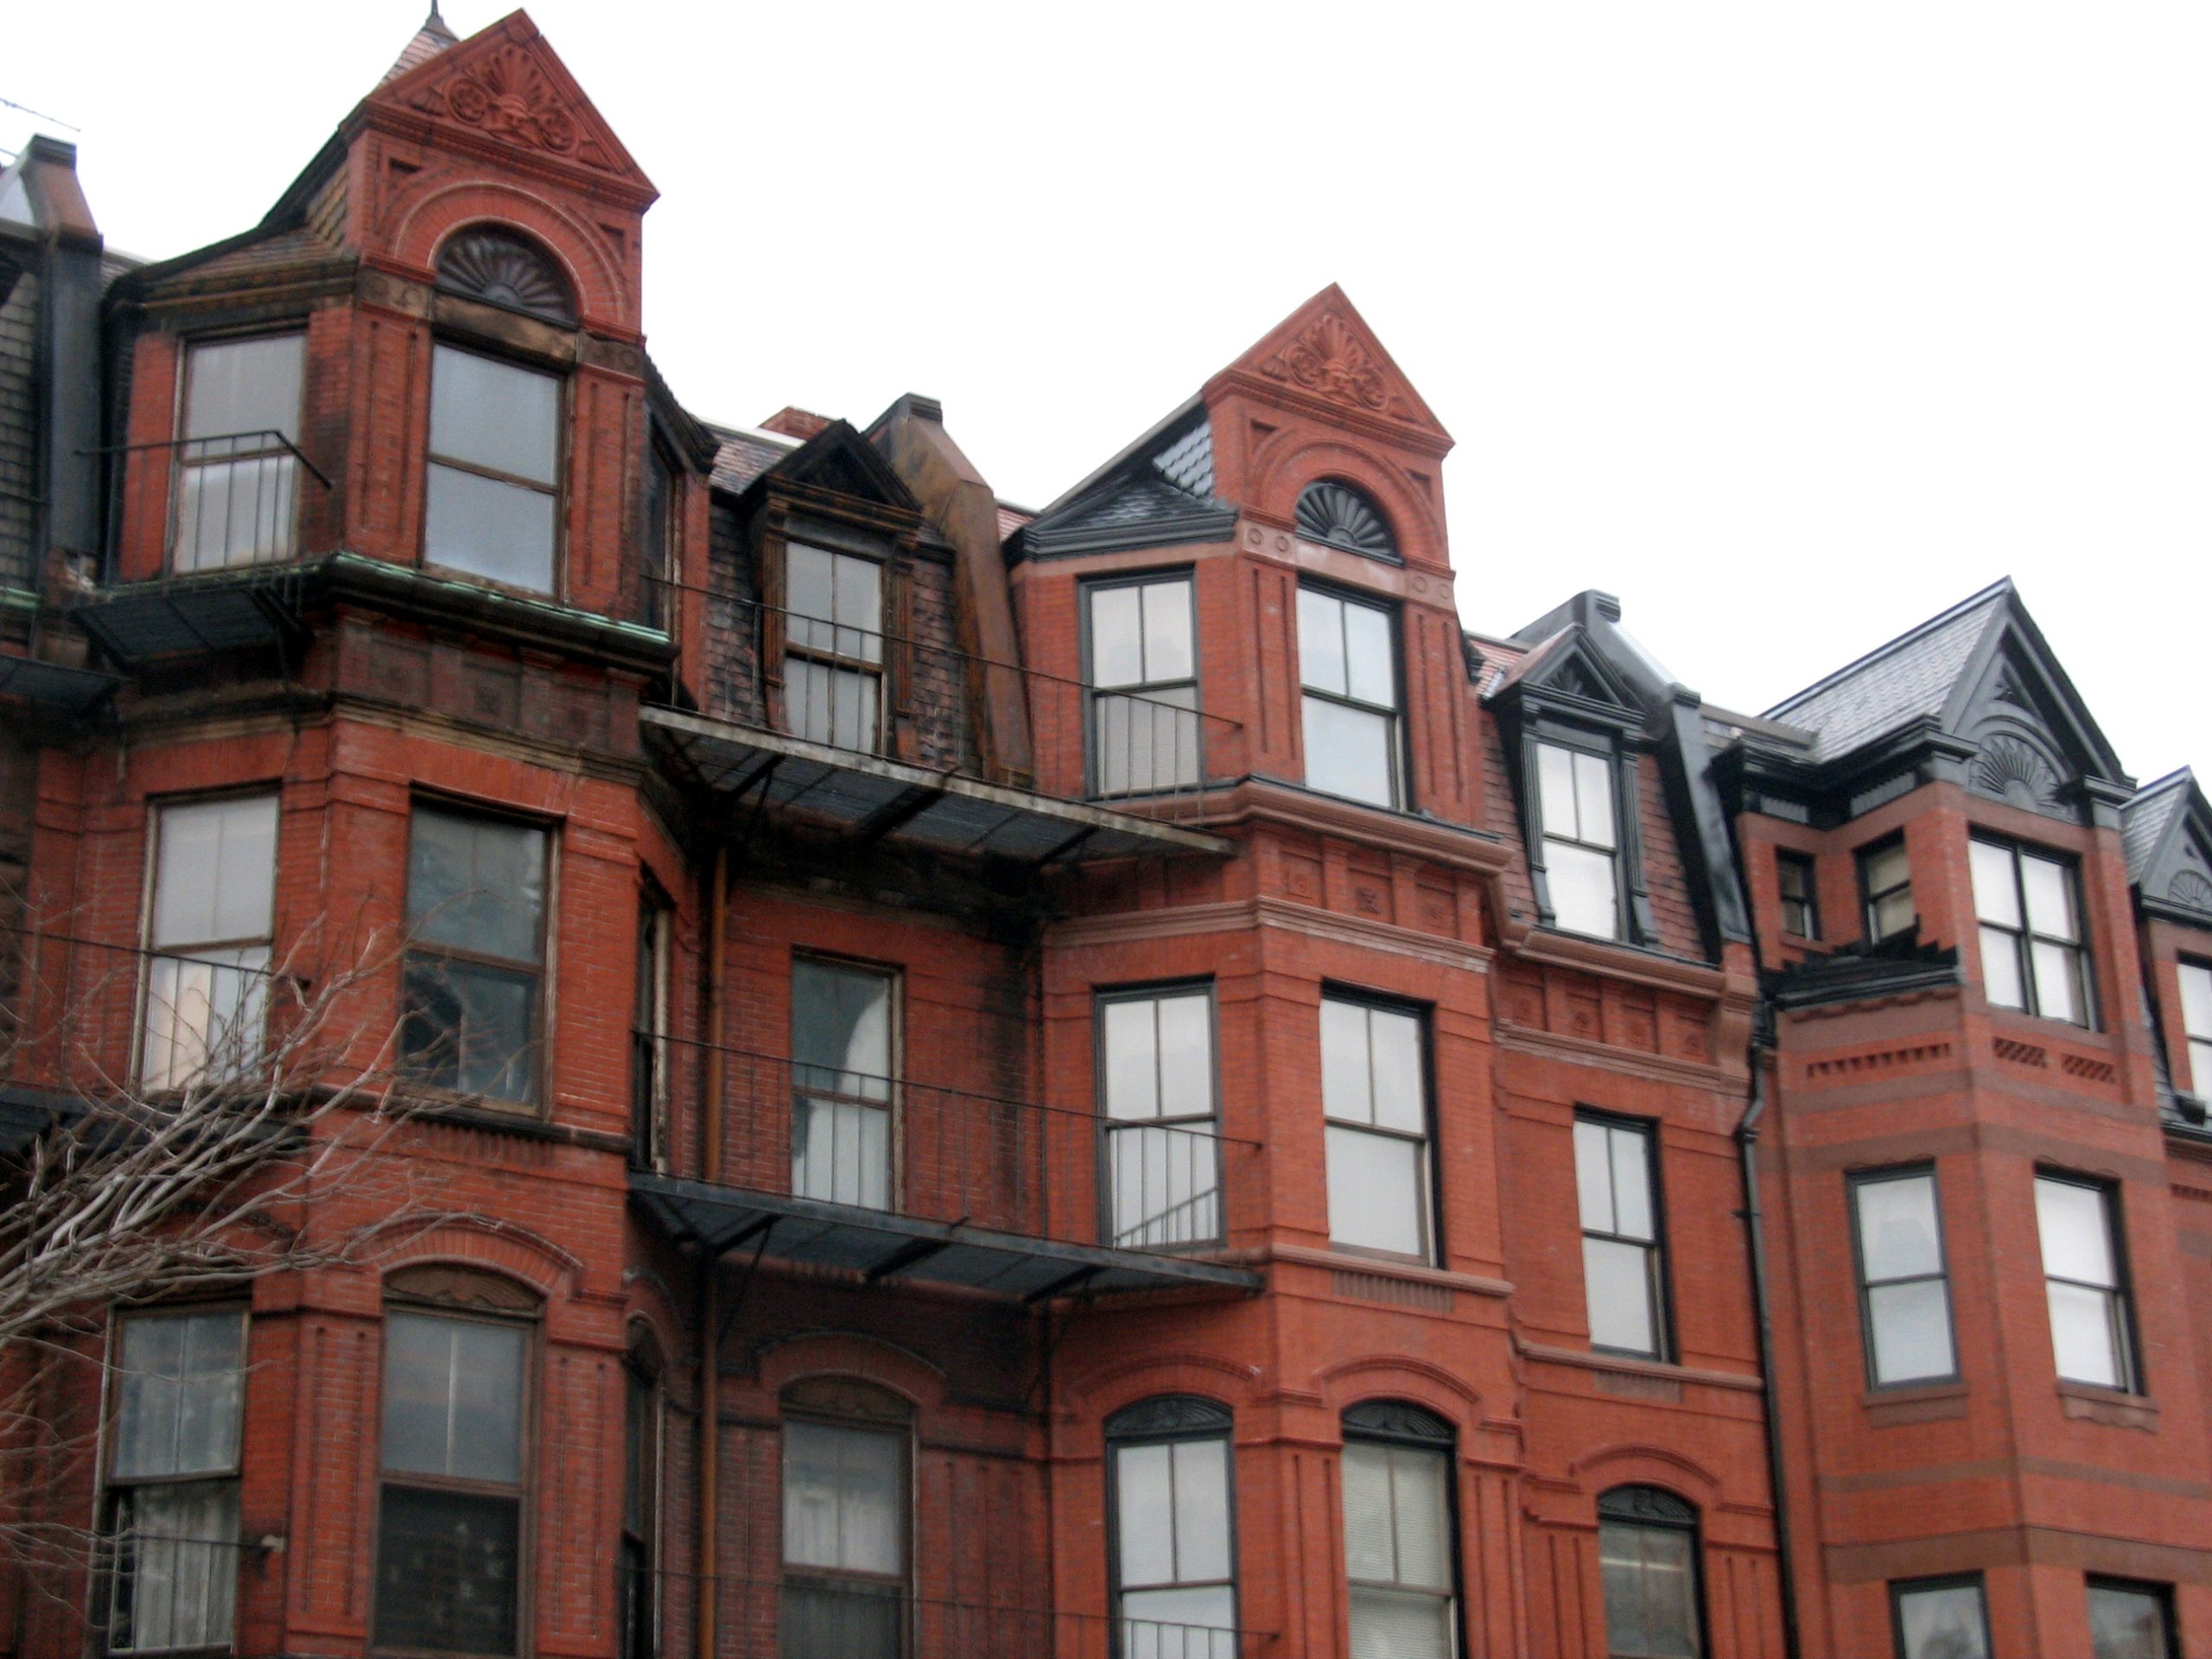 Back Bay Homes (user submitted)